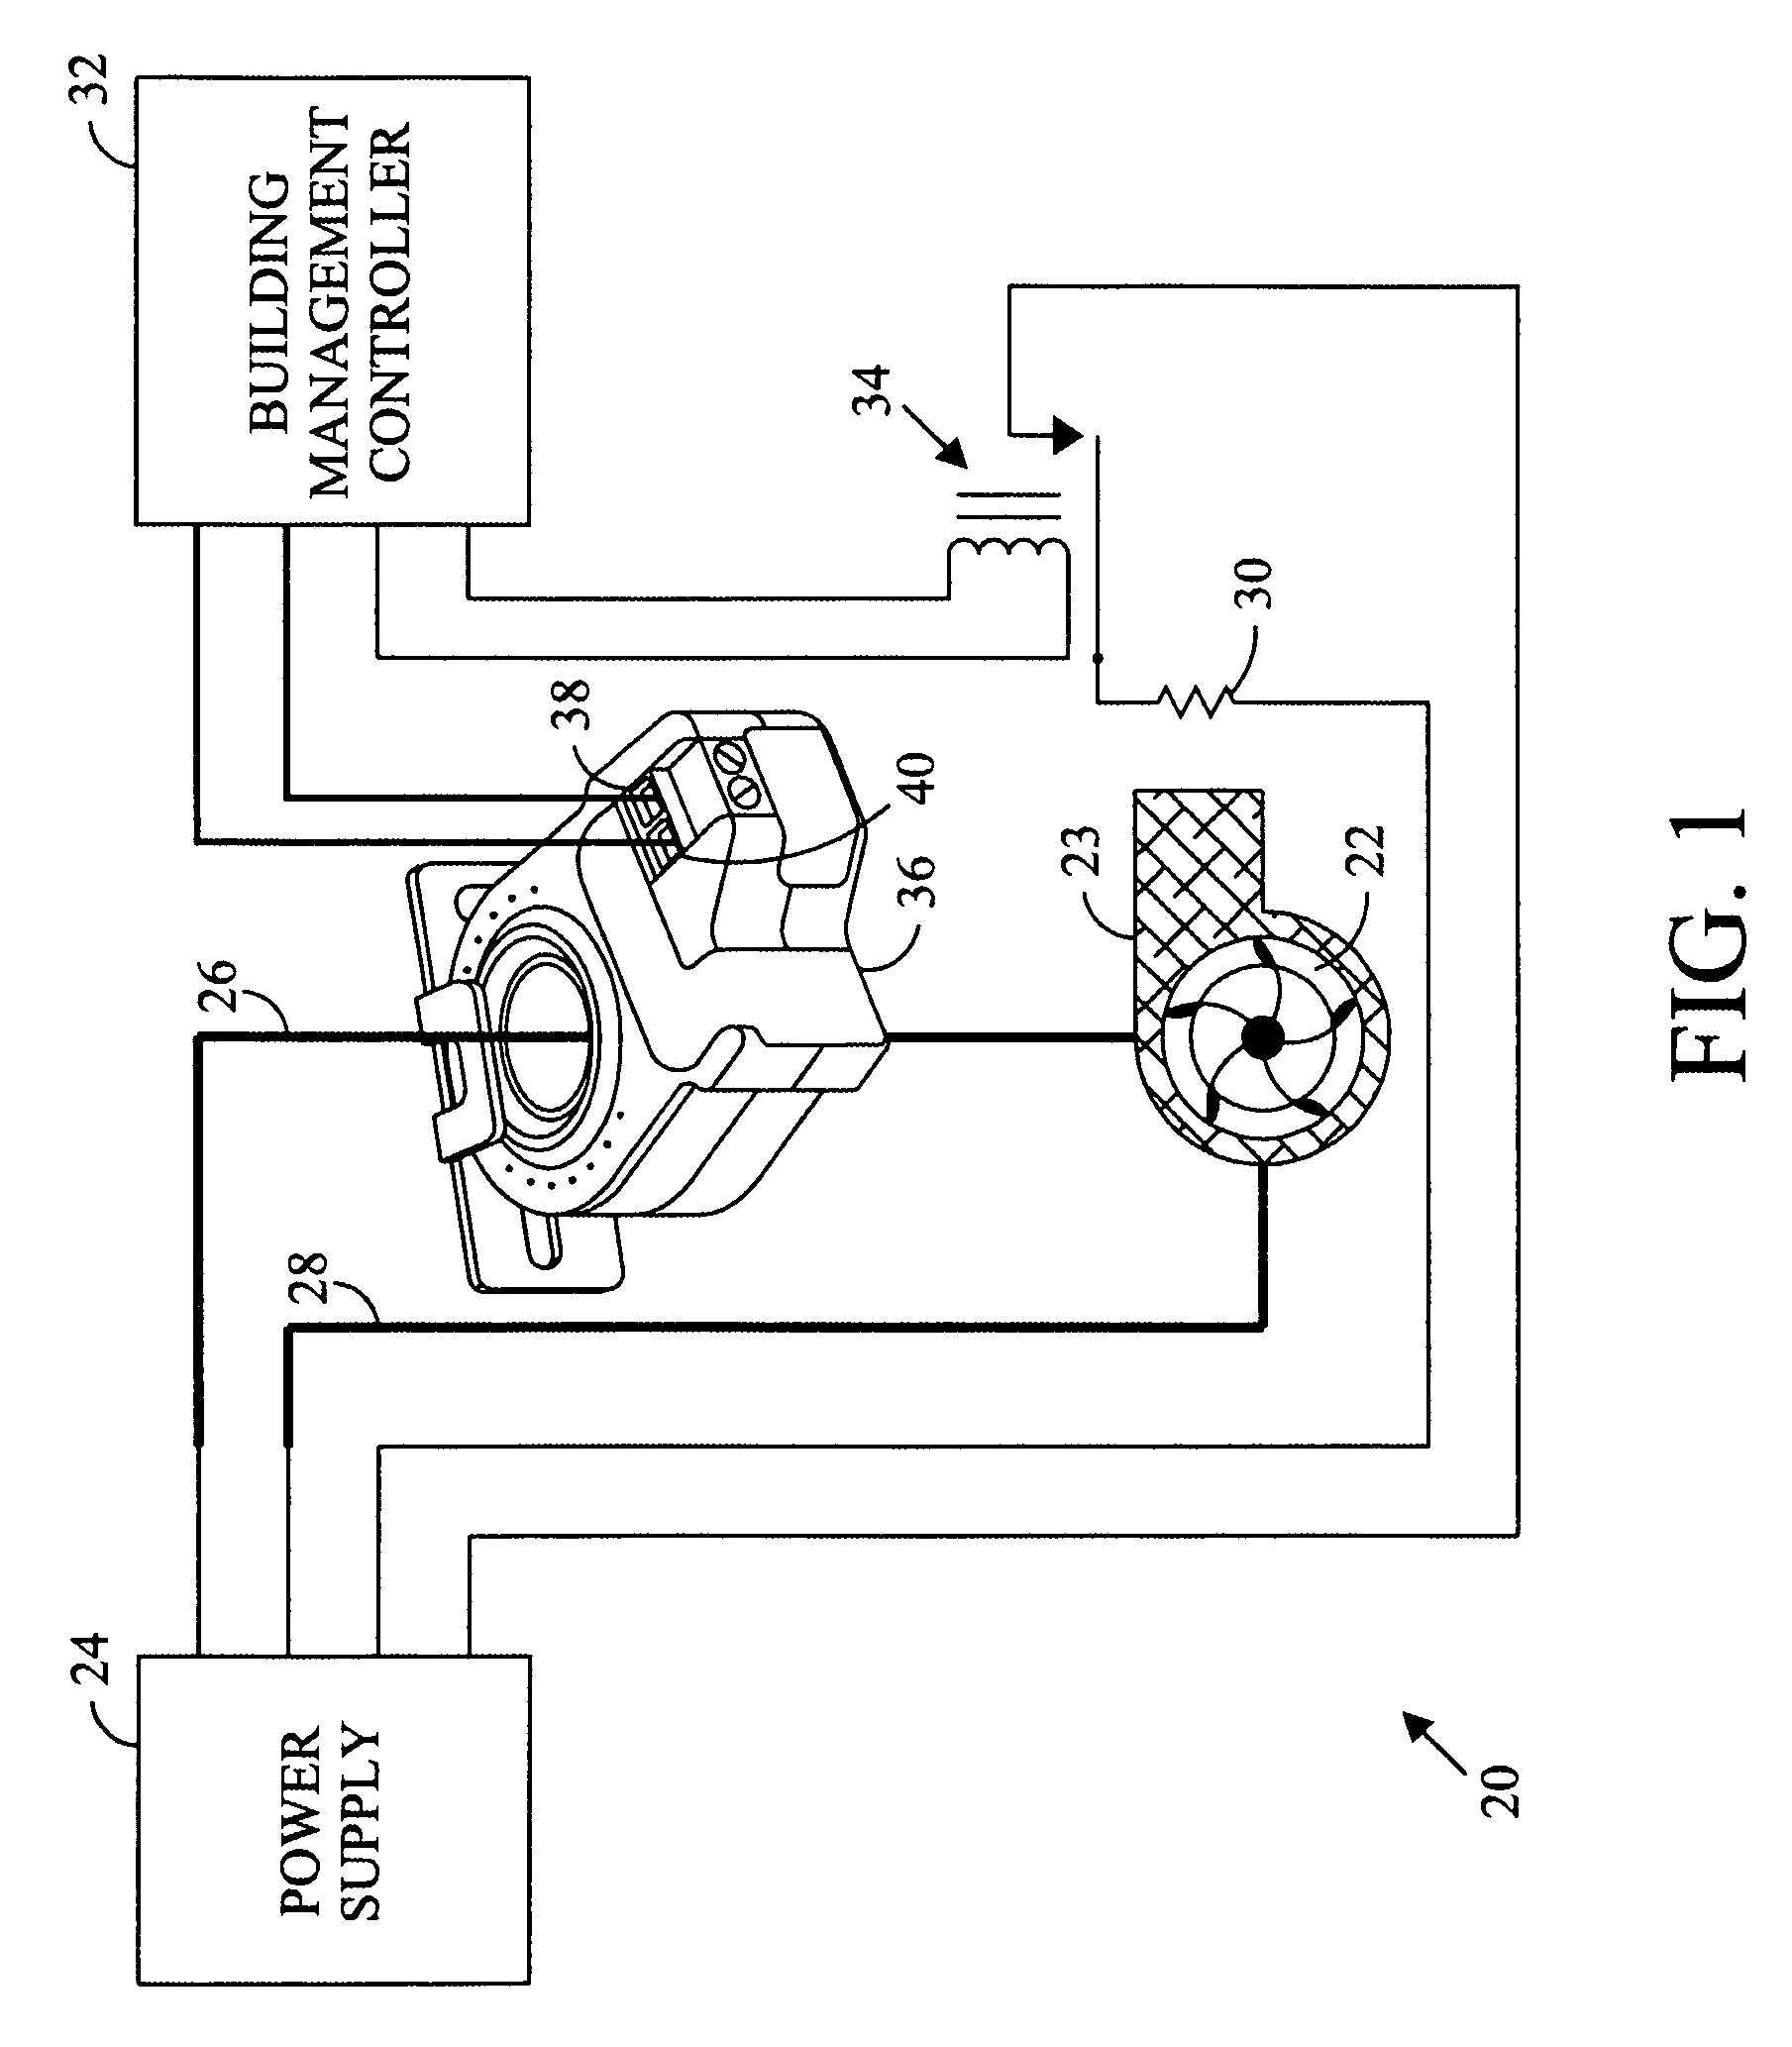 Low threshold current switch